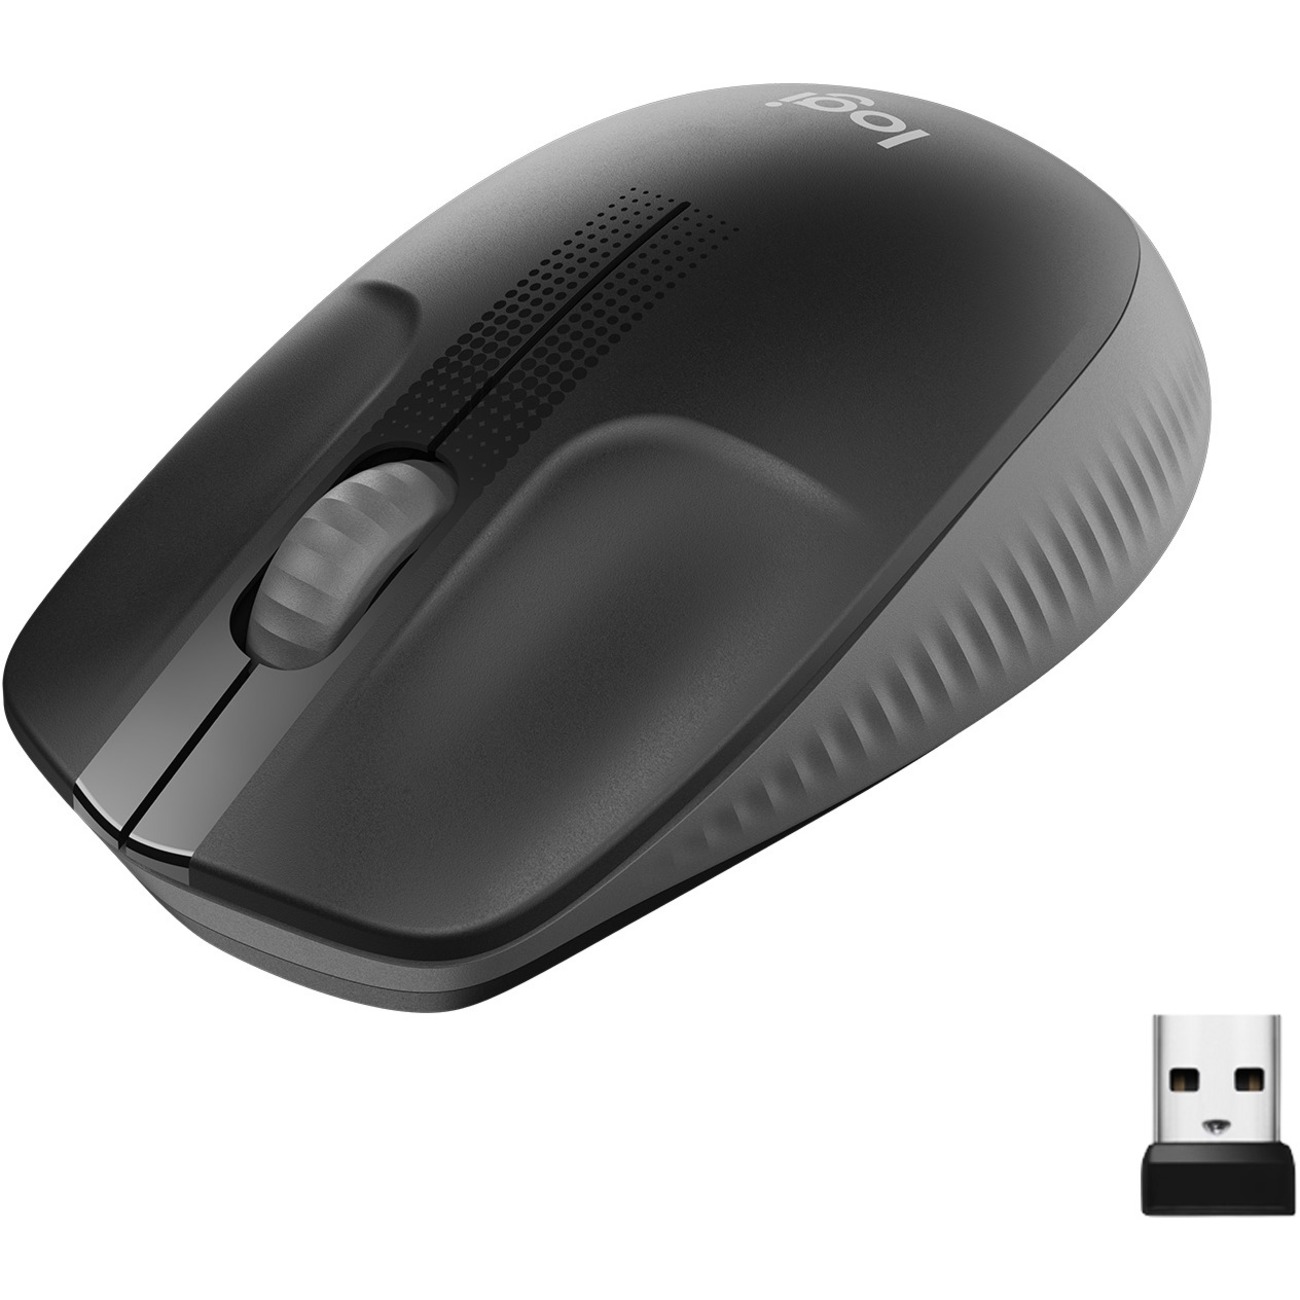 Logitech Wireless Mouse M190 - Full Size Ambidextrous Curve Design,  18-Month Battery with Power Saving Mode, Precise Cursor Control &  Scrolling, Wide Scroll Wheel, Thumb Grips (Charcoal) - Full-size Mouse -  Optical 